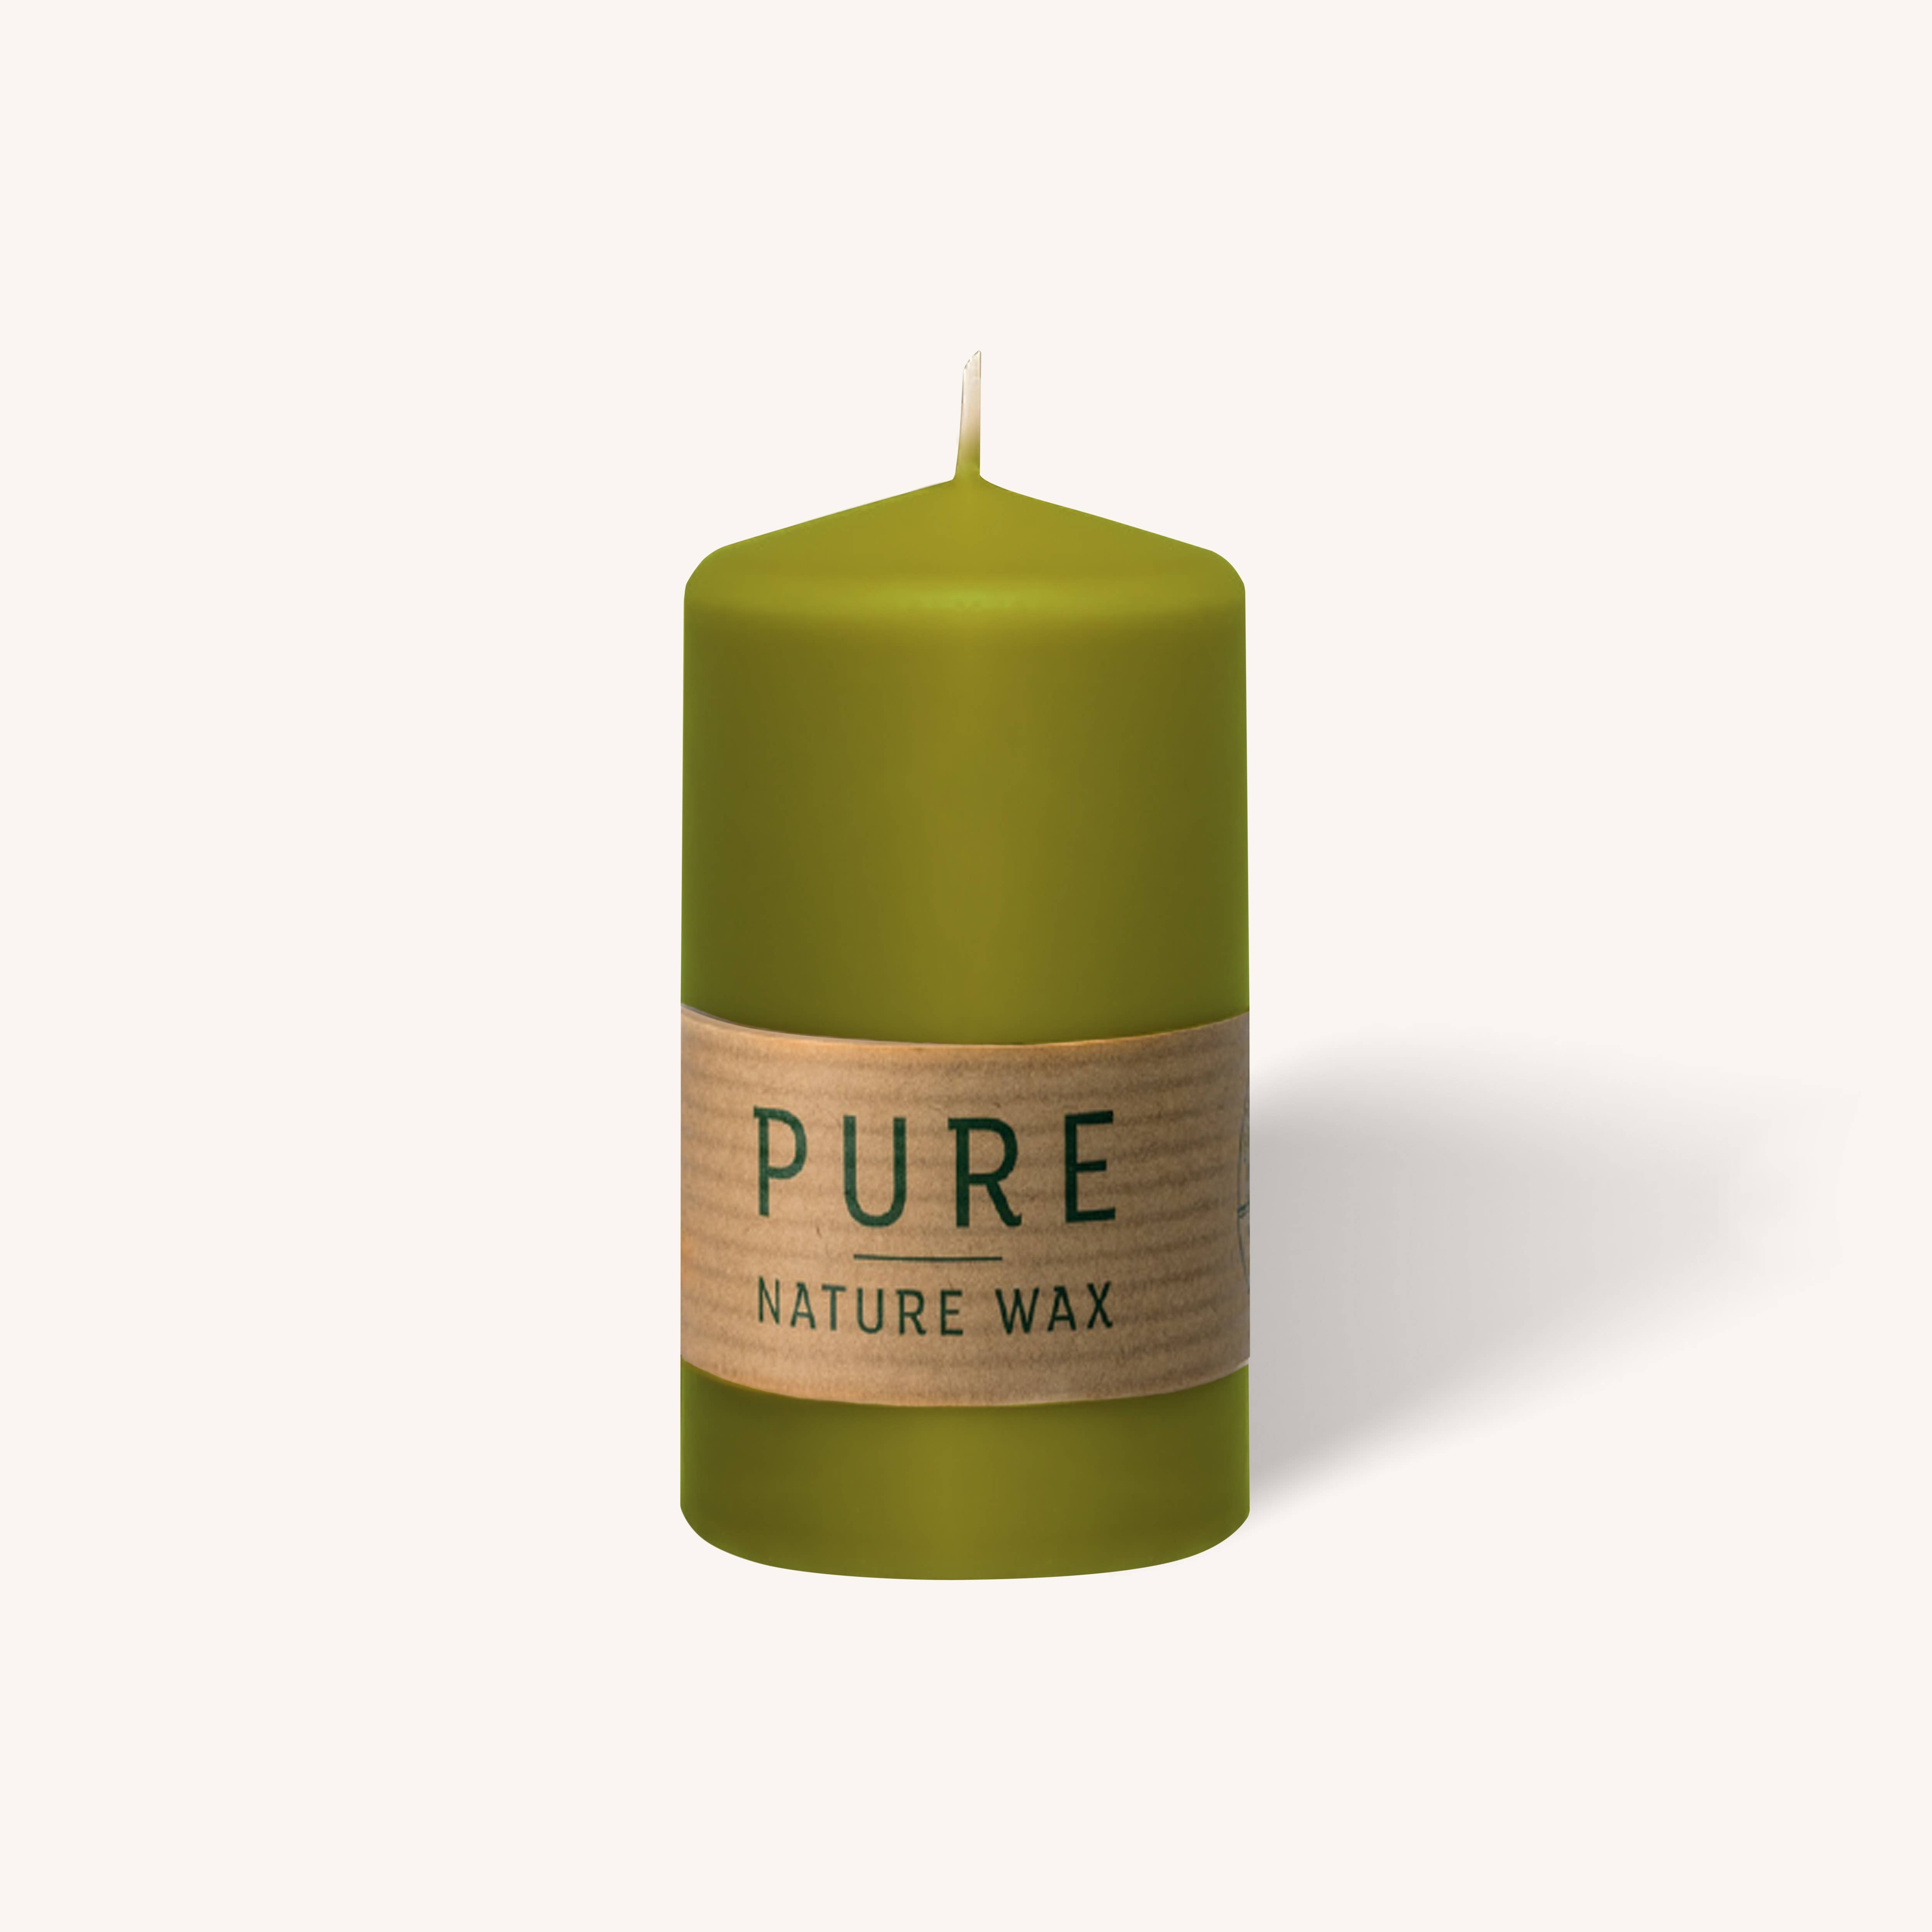 Pure Nature Wax Green Pillar Candle - 2.7” x 5" - 3 Pack